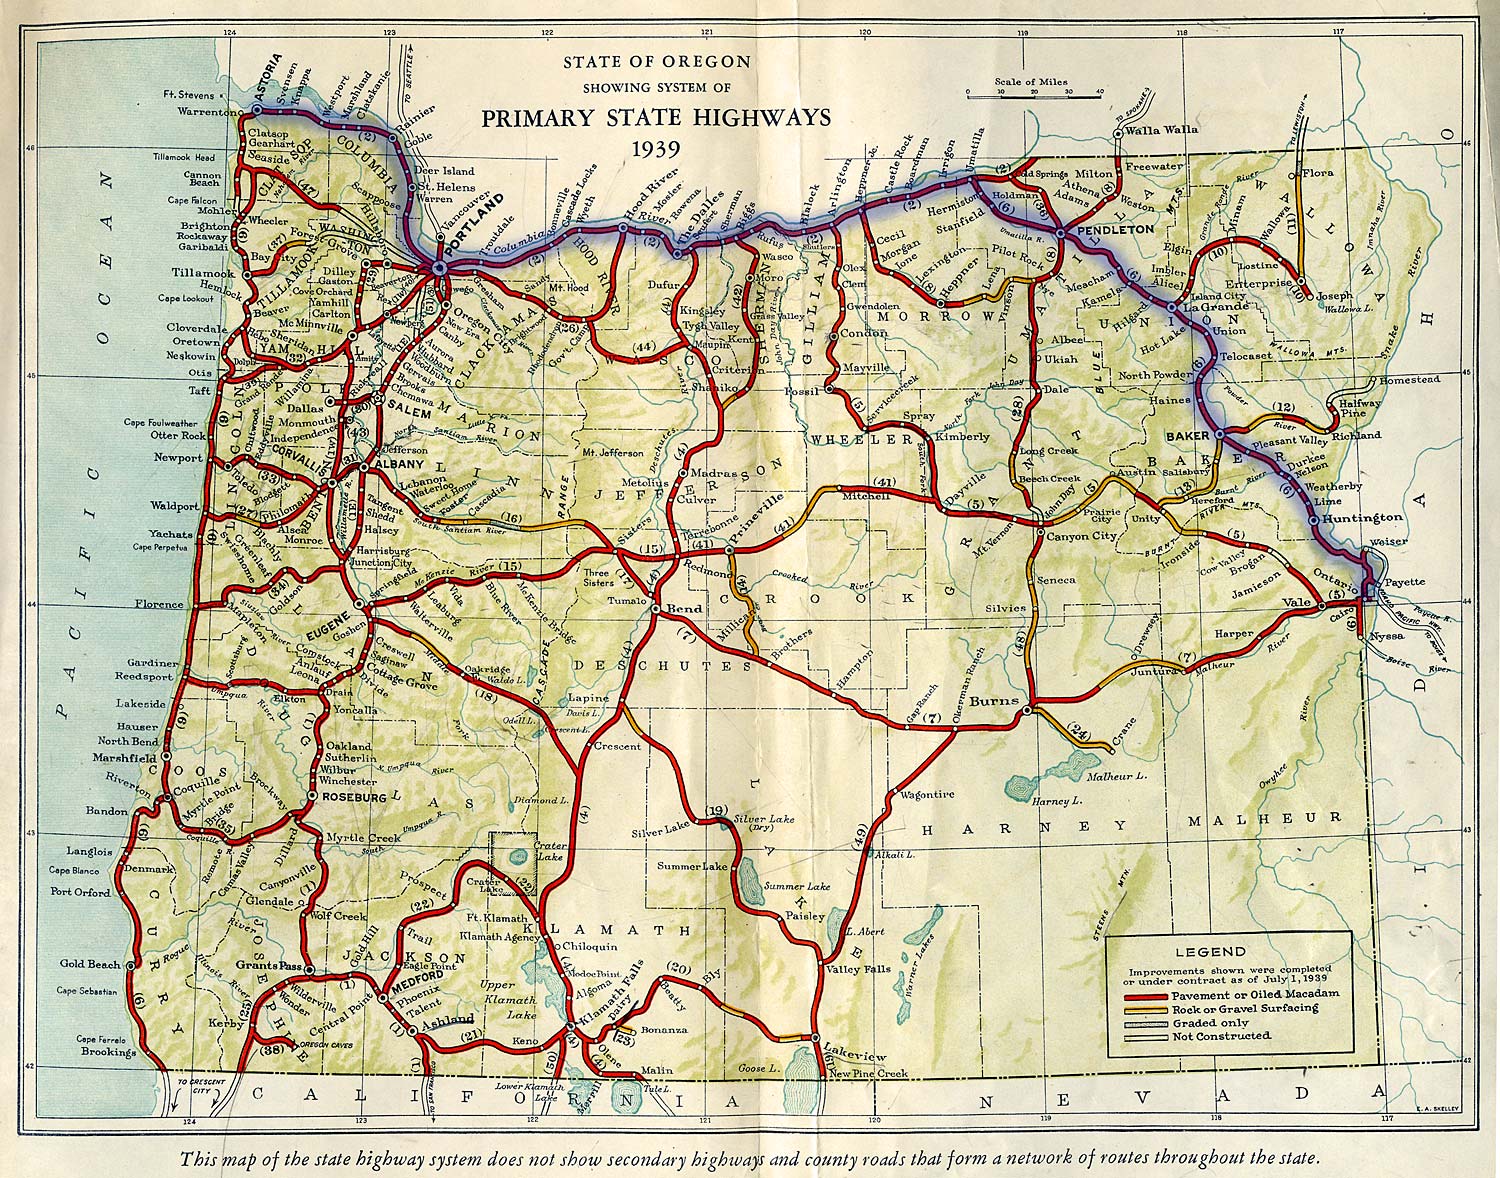 State of ORegon map from 1939 showing primary state highways